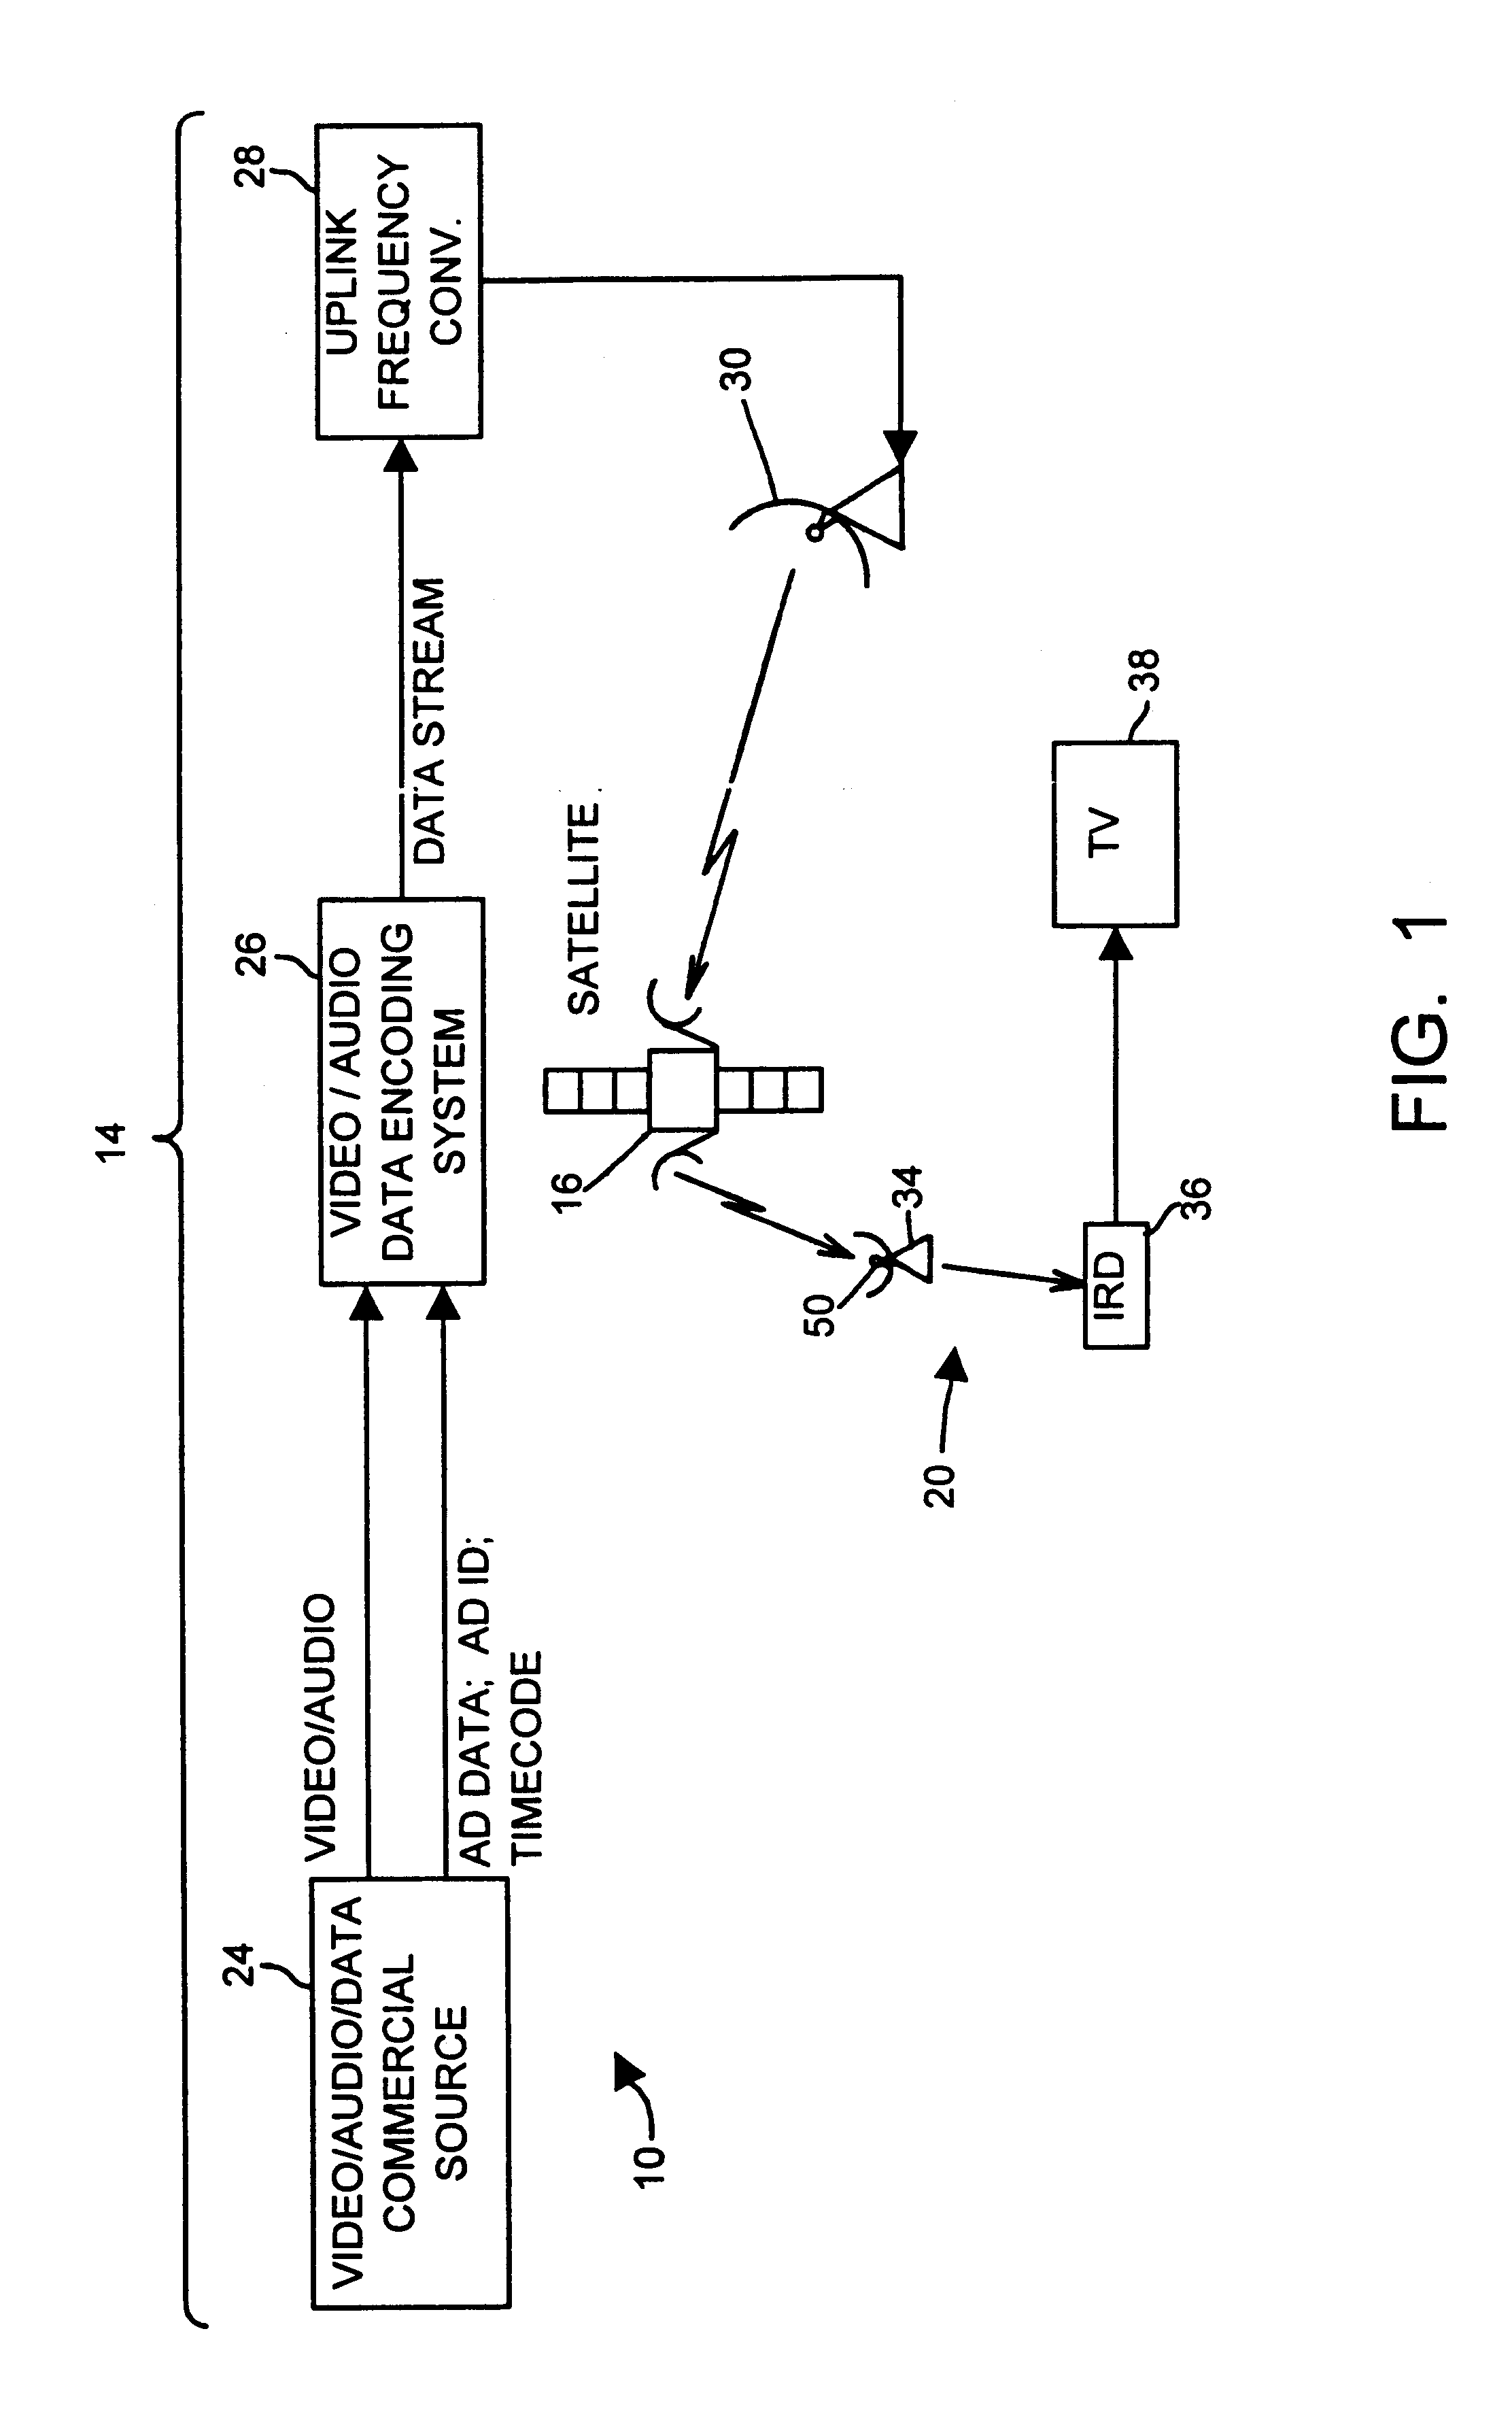 Electronic television program guide data naming system and method